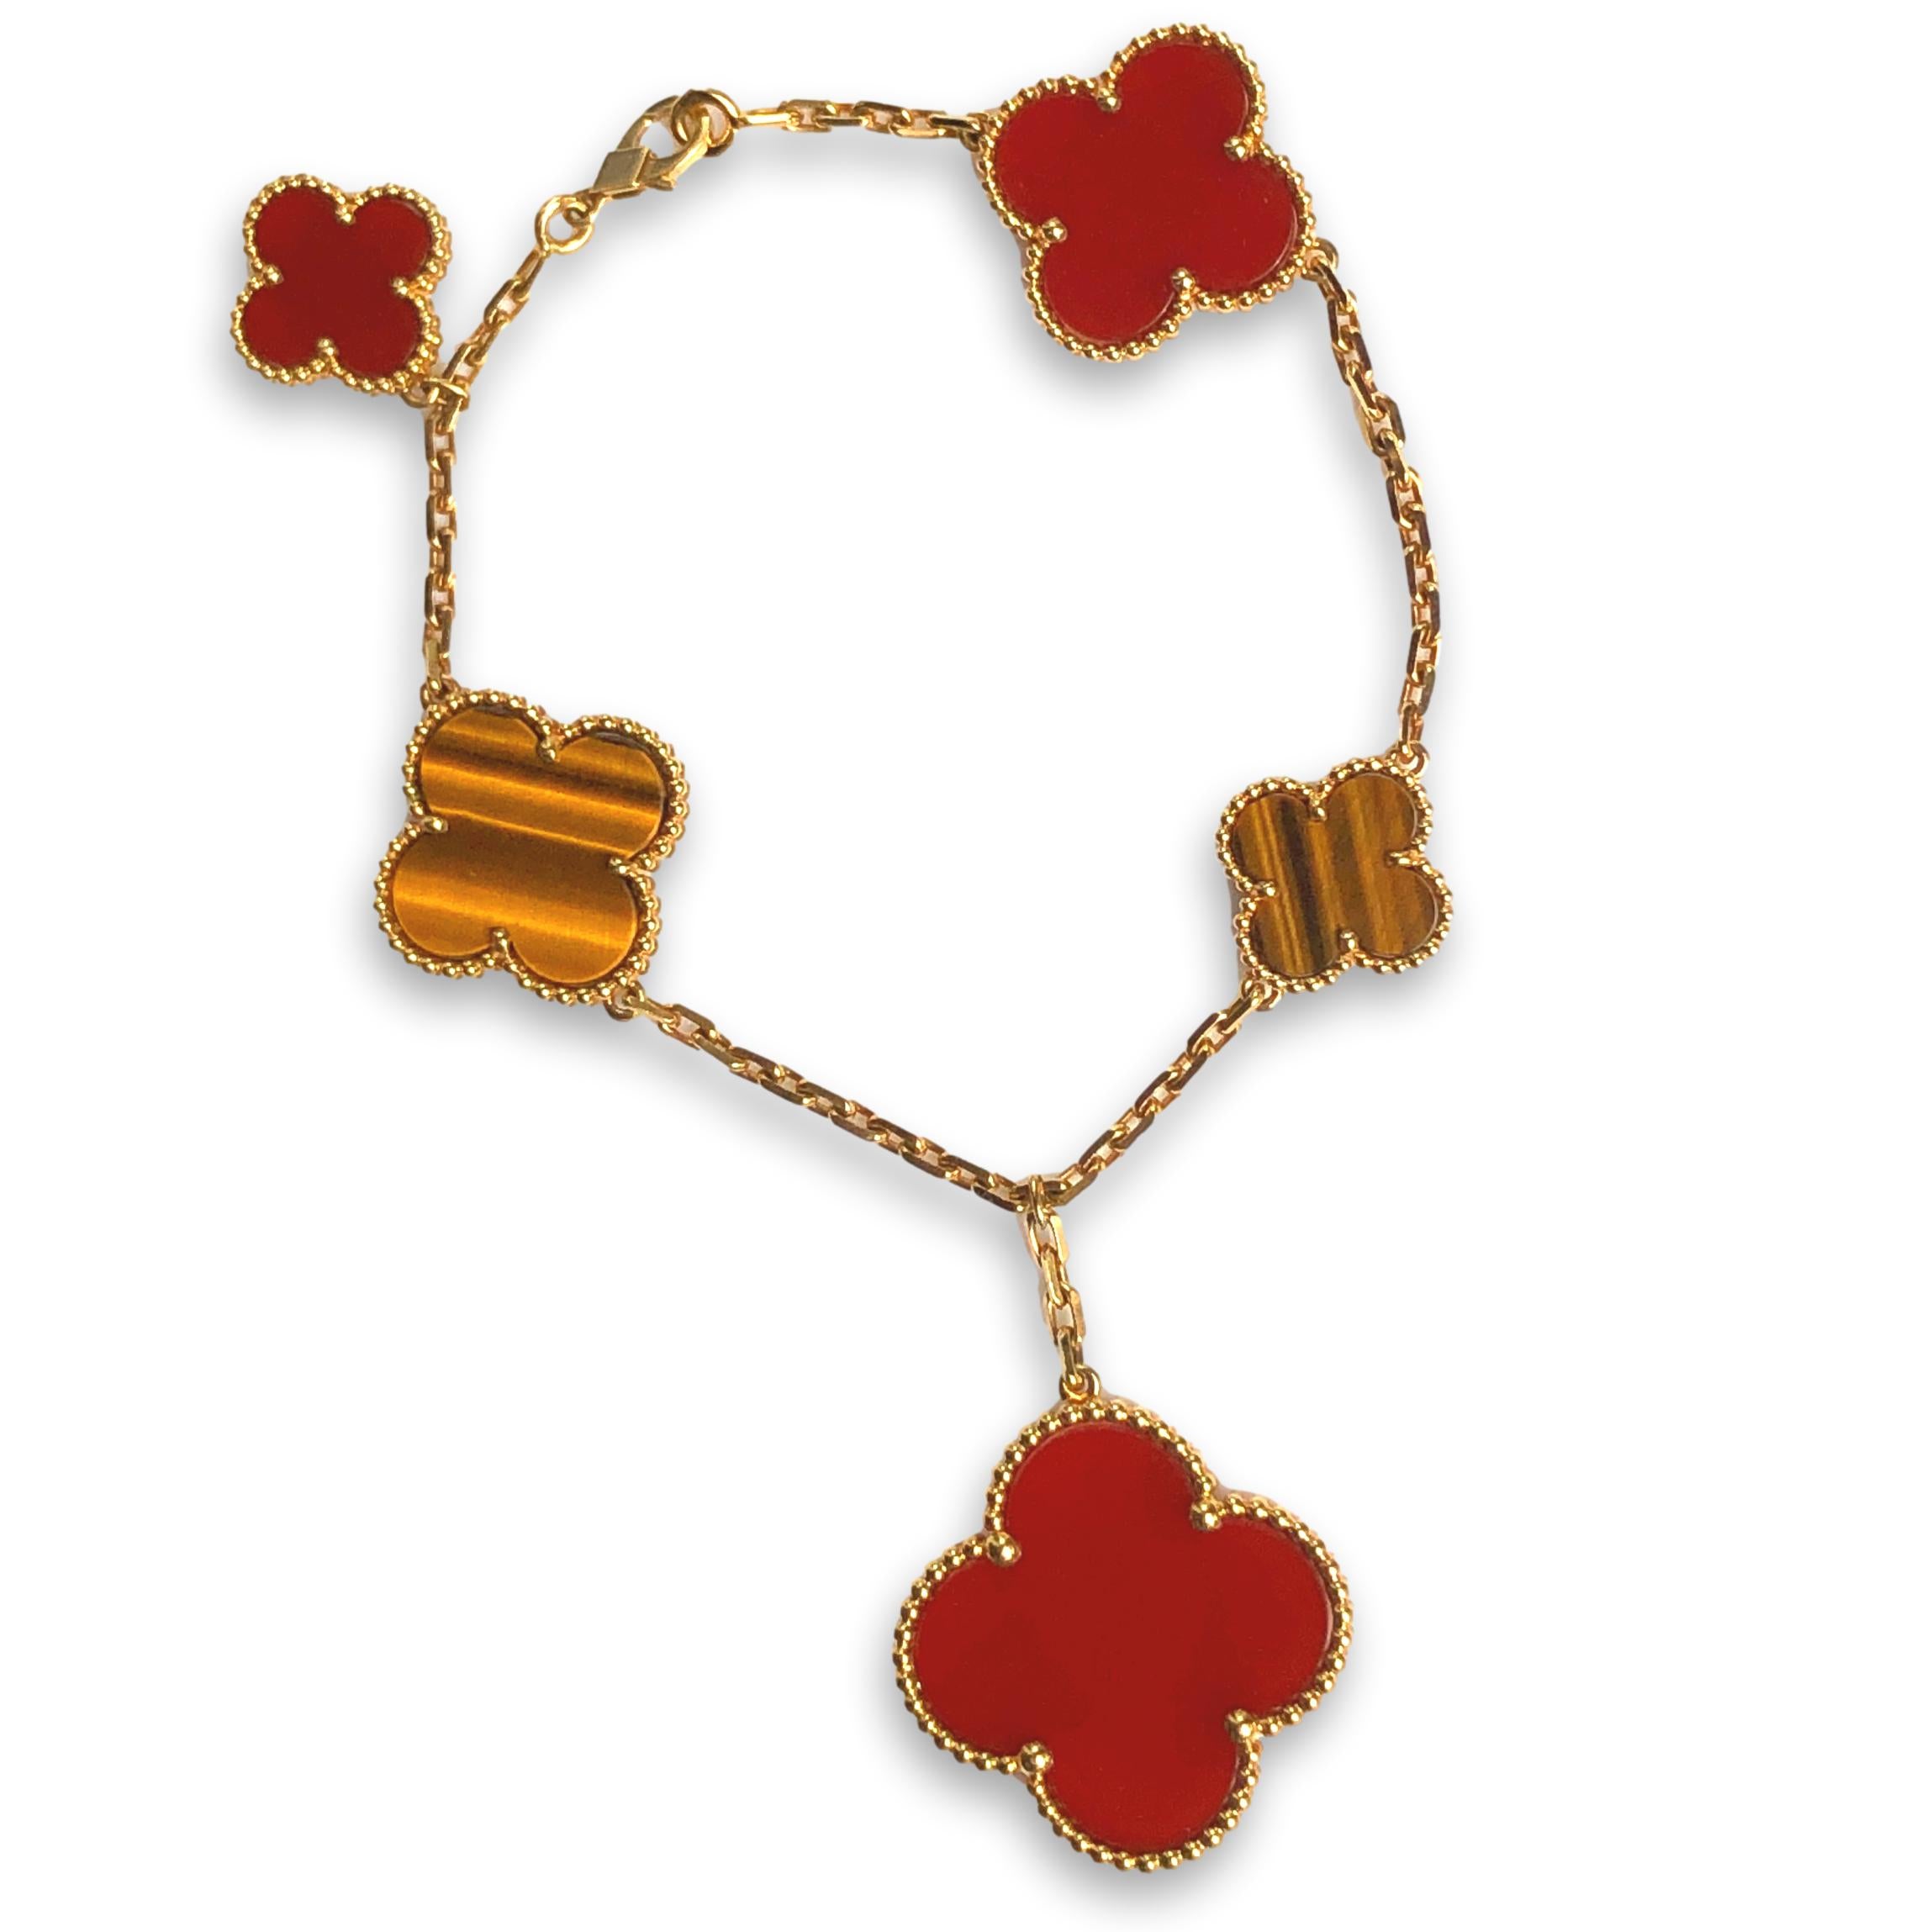 Carnelian Jewellery  Unique  Handcrafted with Natural Stones by Abiza